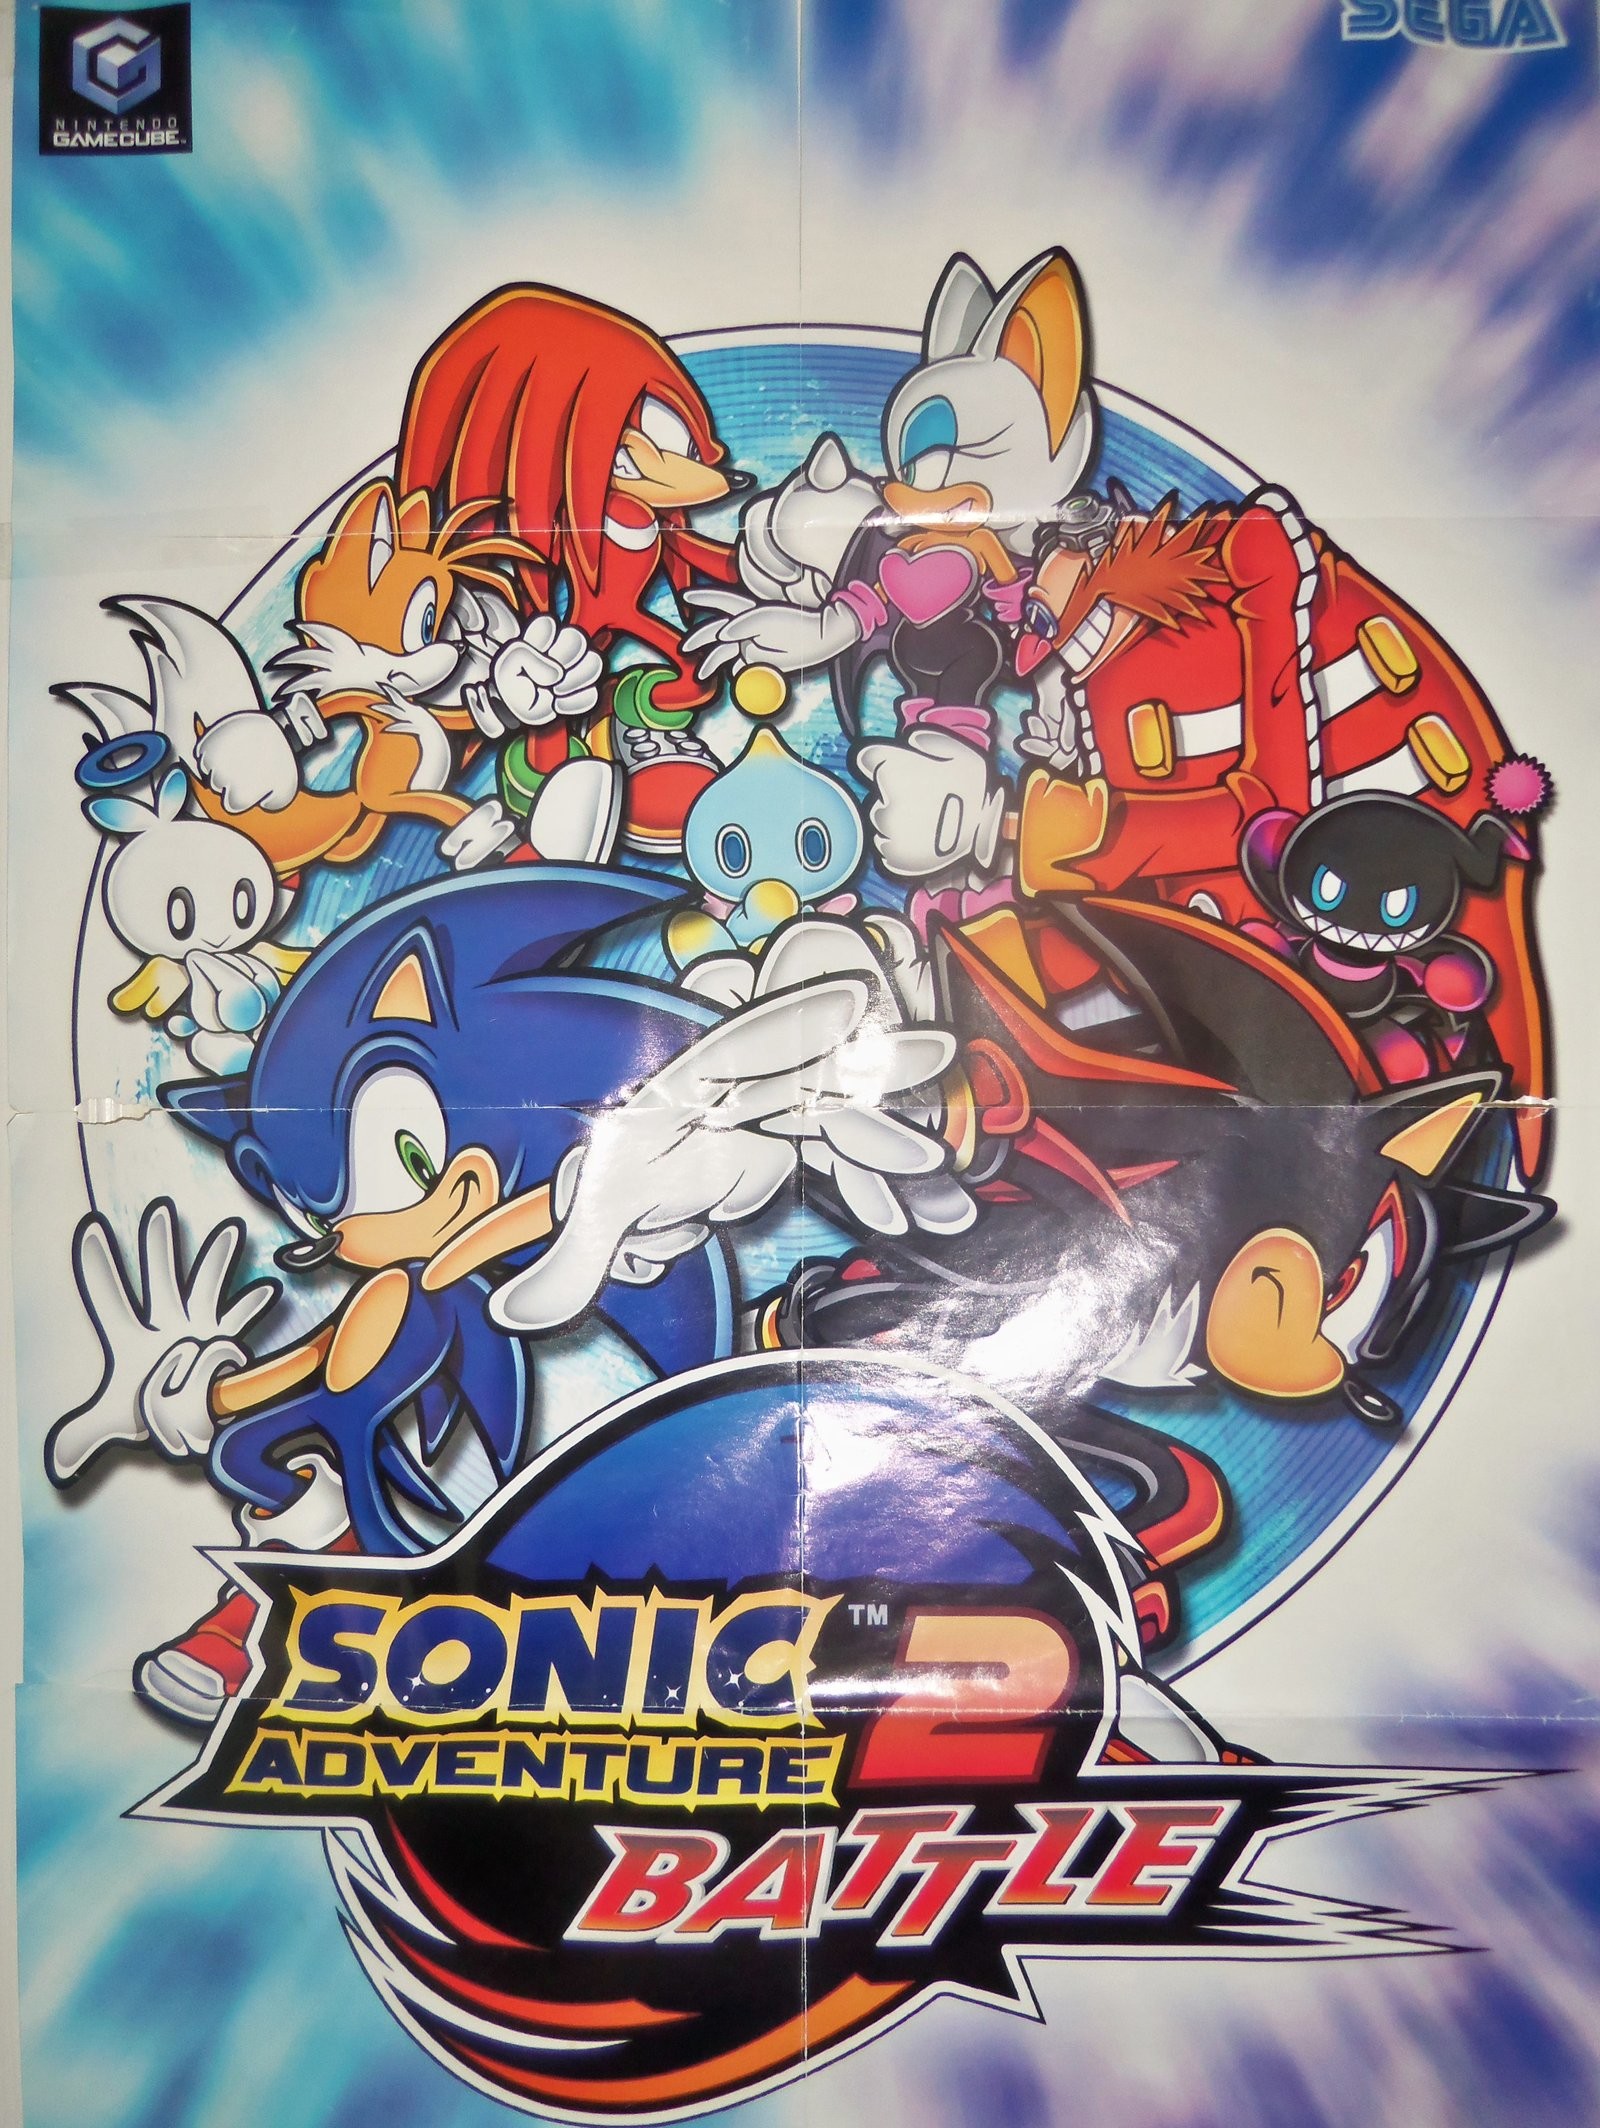 1600x2128 ... My Sonic Adventure 2 Battle Poster by bvw1979